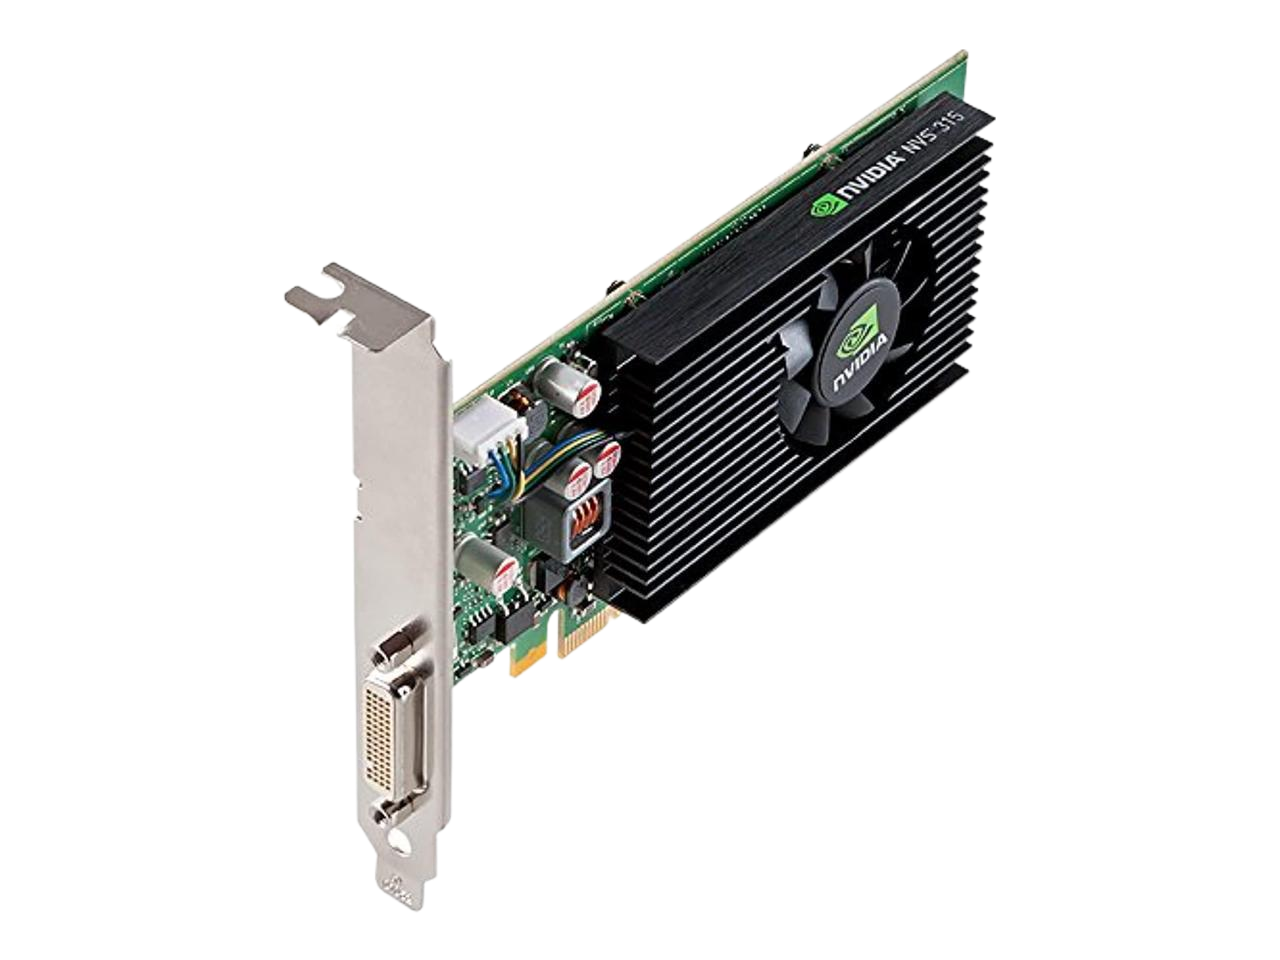 HP NVIDIA Quadro NVS315 1GB PCIE x16 Graphics Card for Z Series Workstations E1C65AA